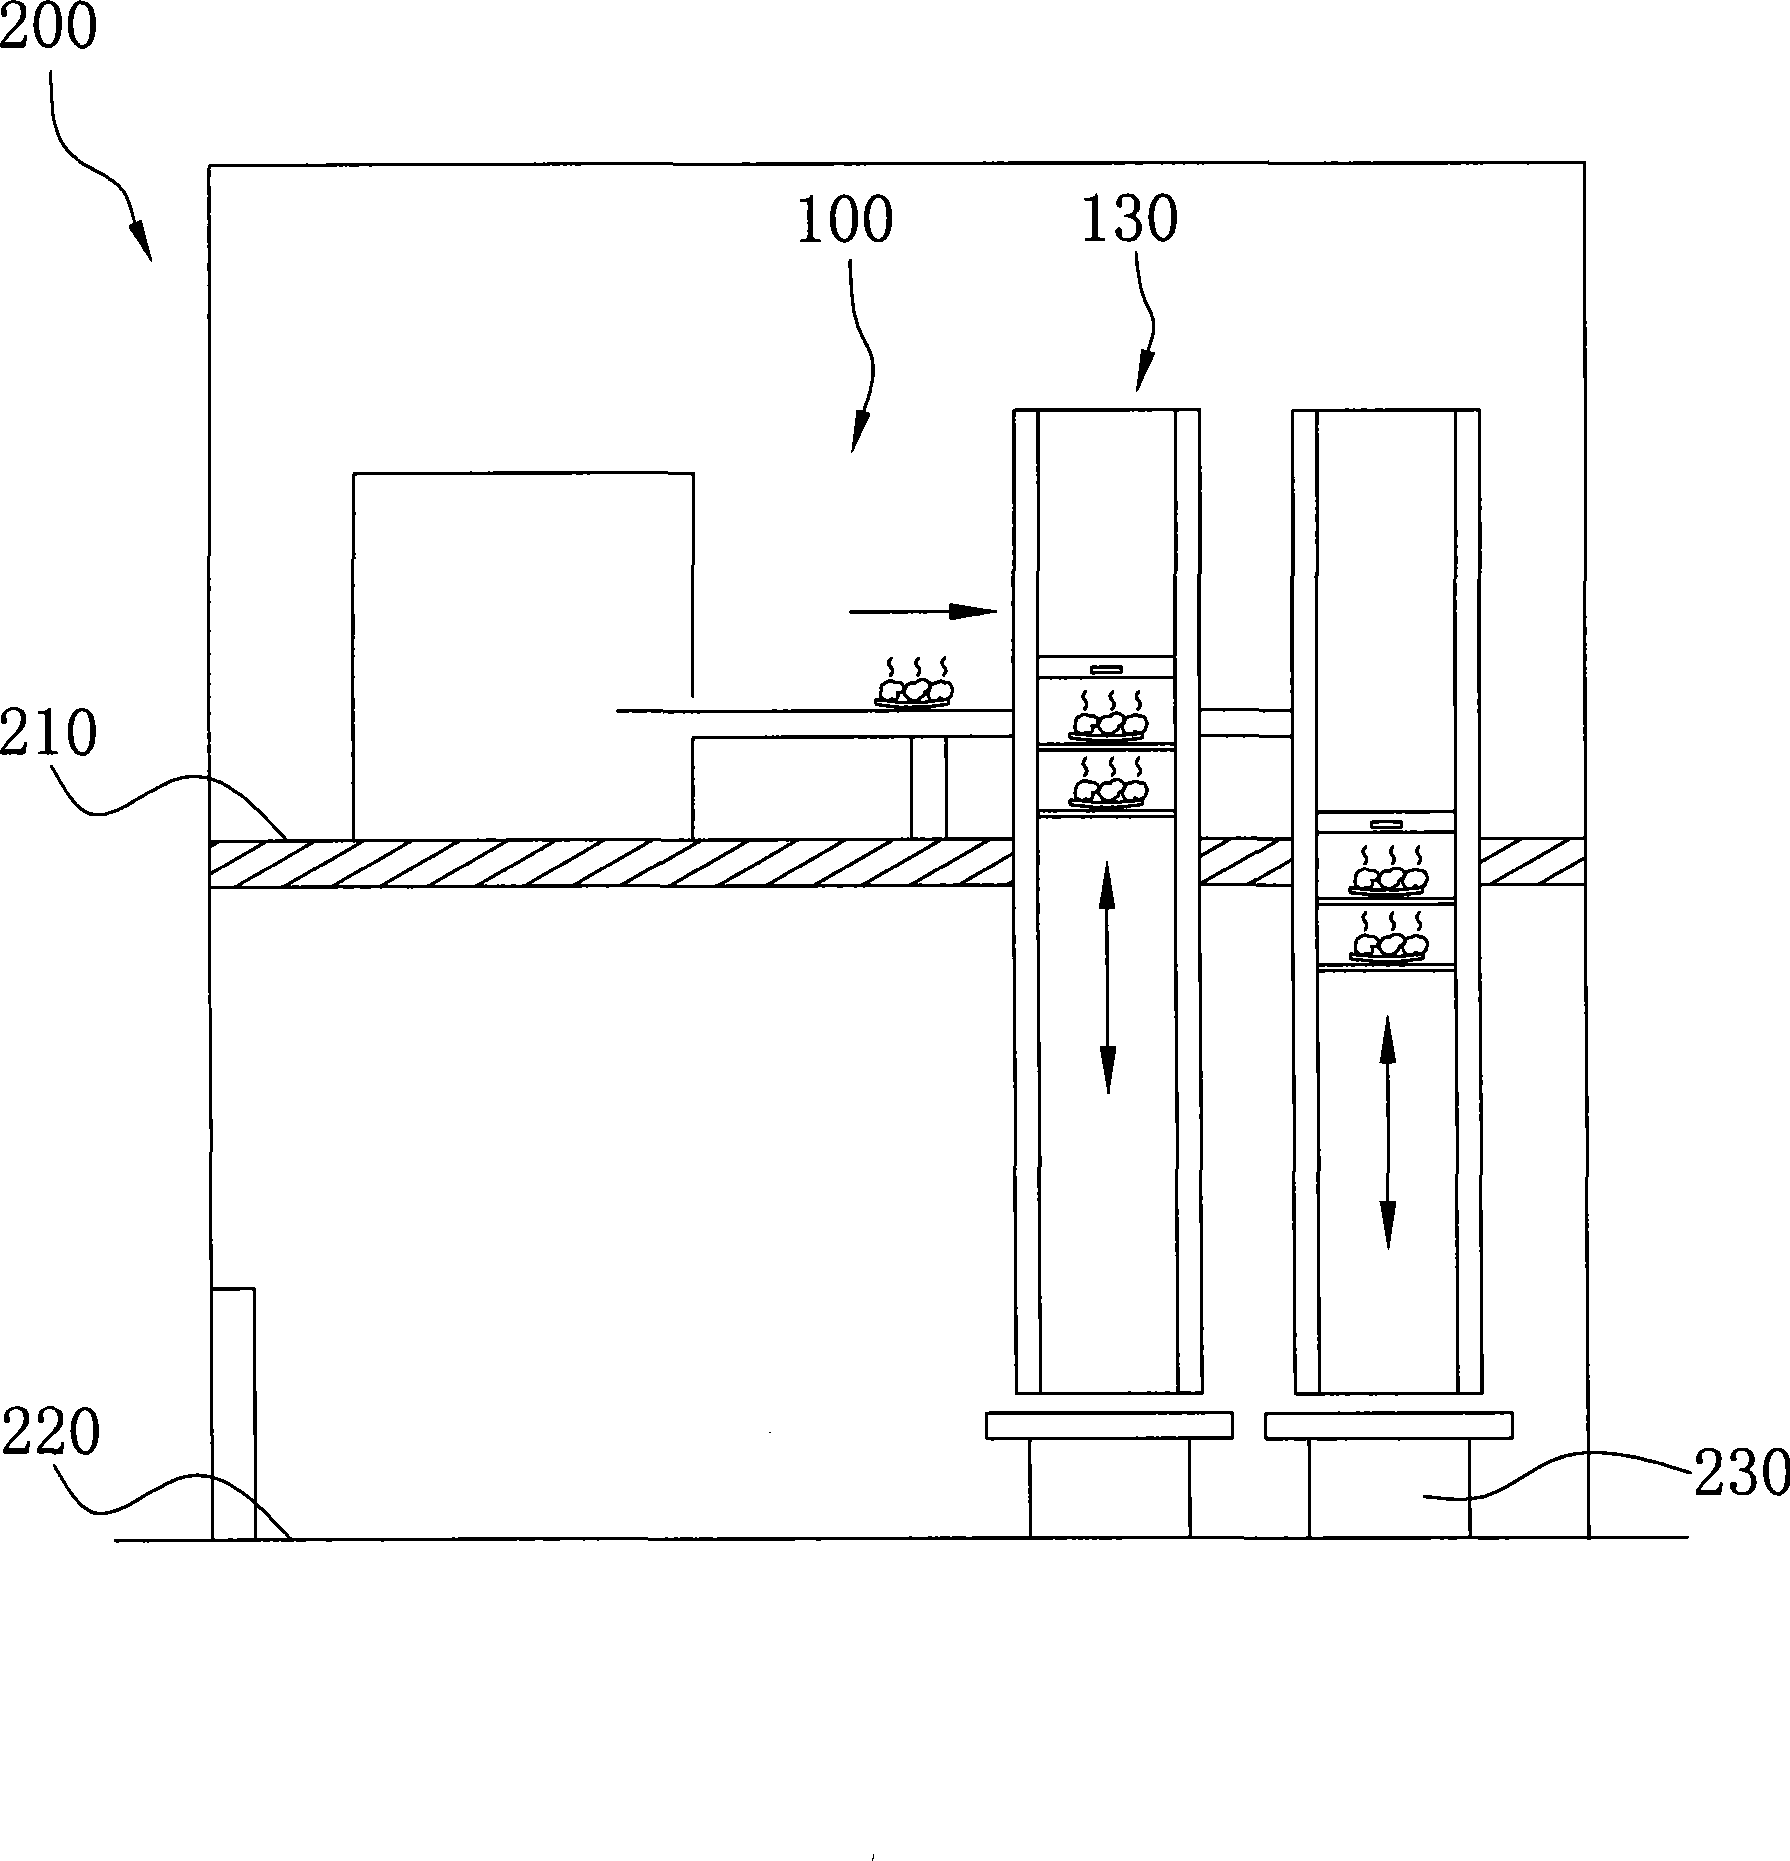 Restaurant supply system and method using wireless radio frequency identification